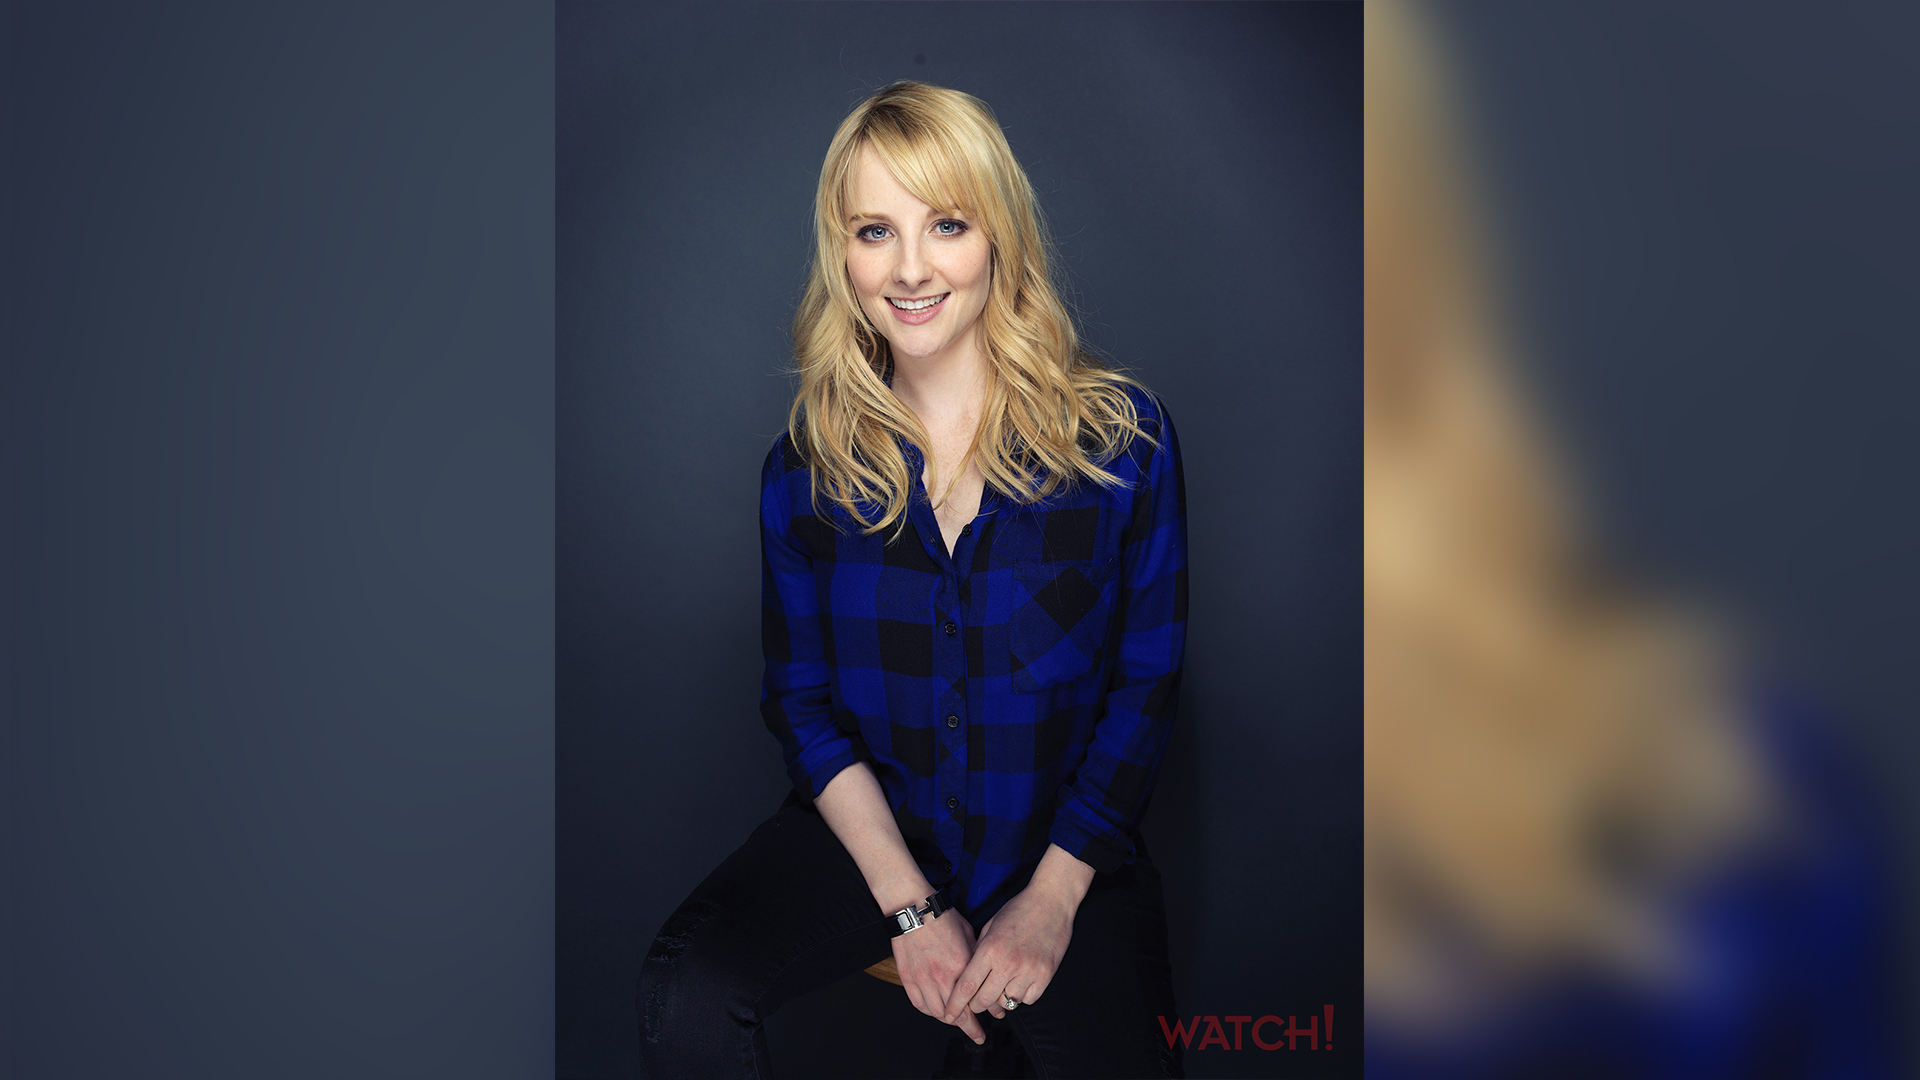 Melissa Rauch Of The Big Bang Theory Is Mesmerizing In These Photos - Watch...